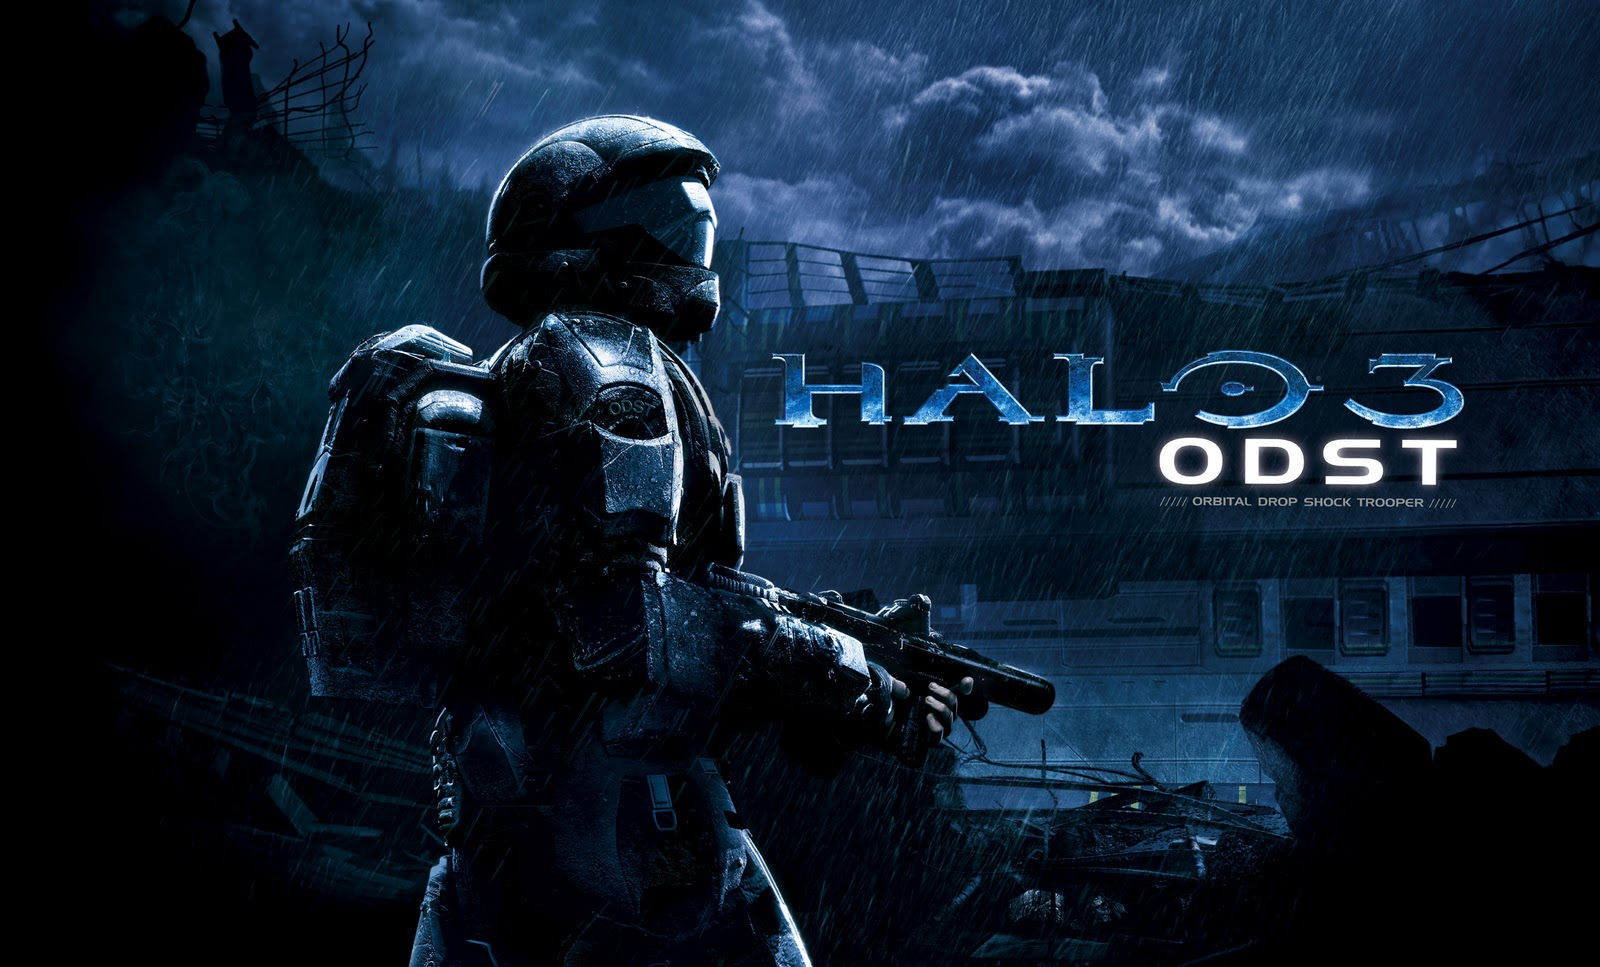 Cyrus Halo Odst Wallpaper